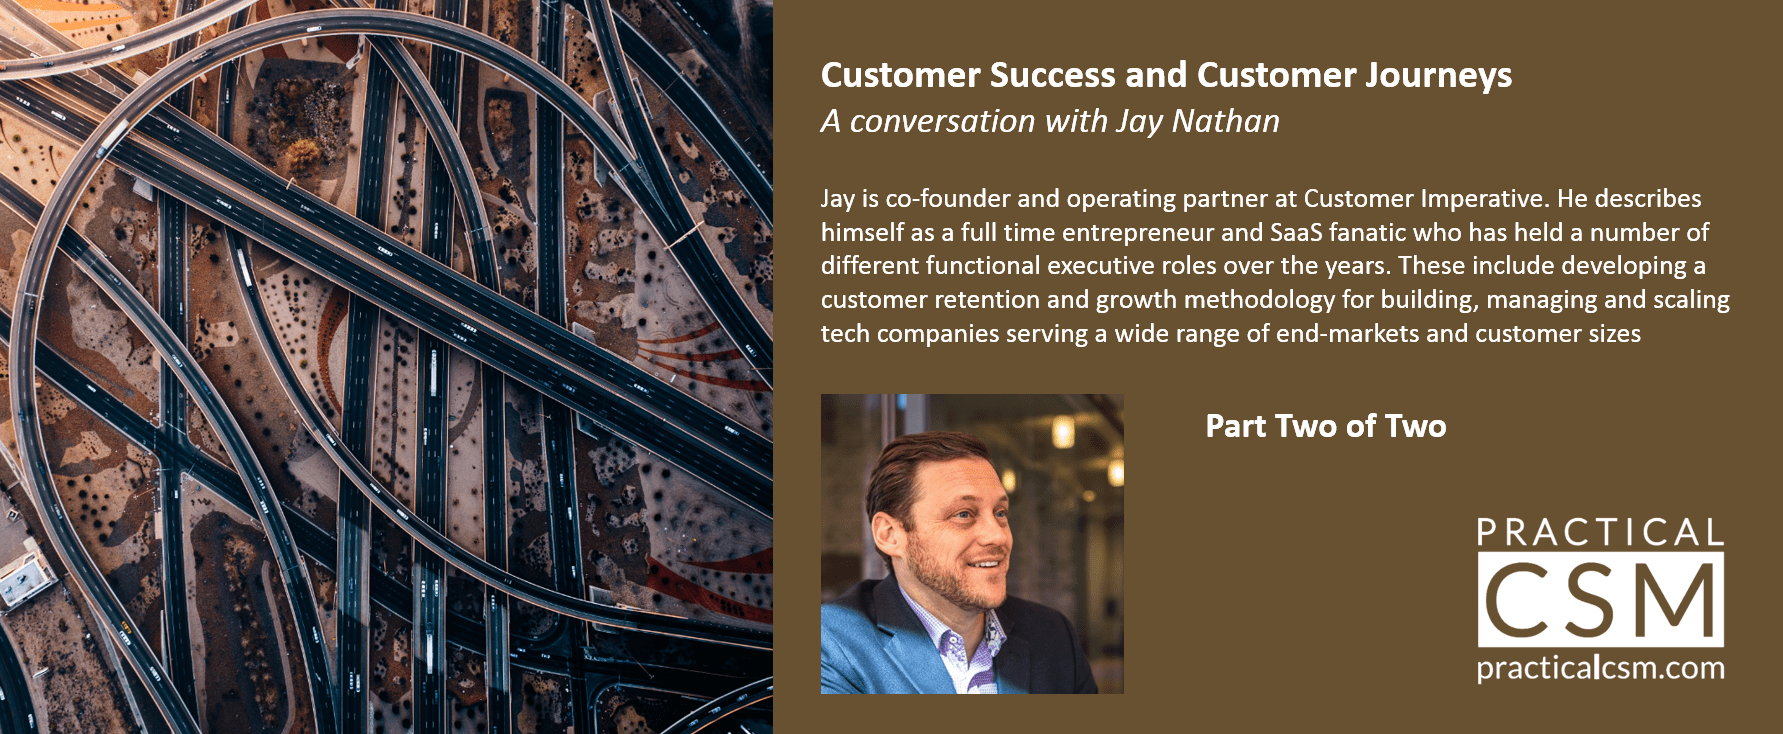 Practical CSM Customer Success and Customer Journey with Jay Nathan part 2